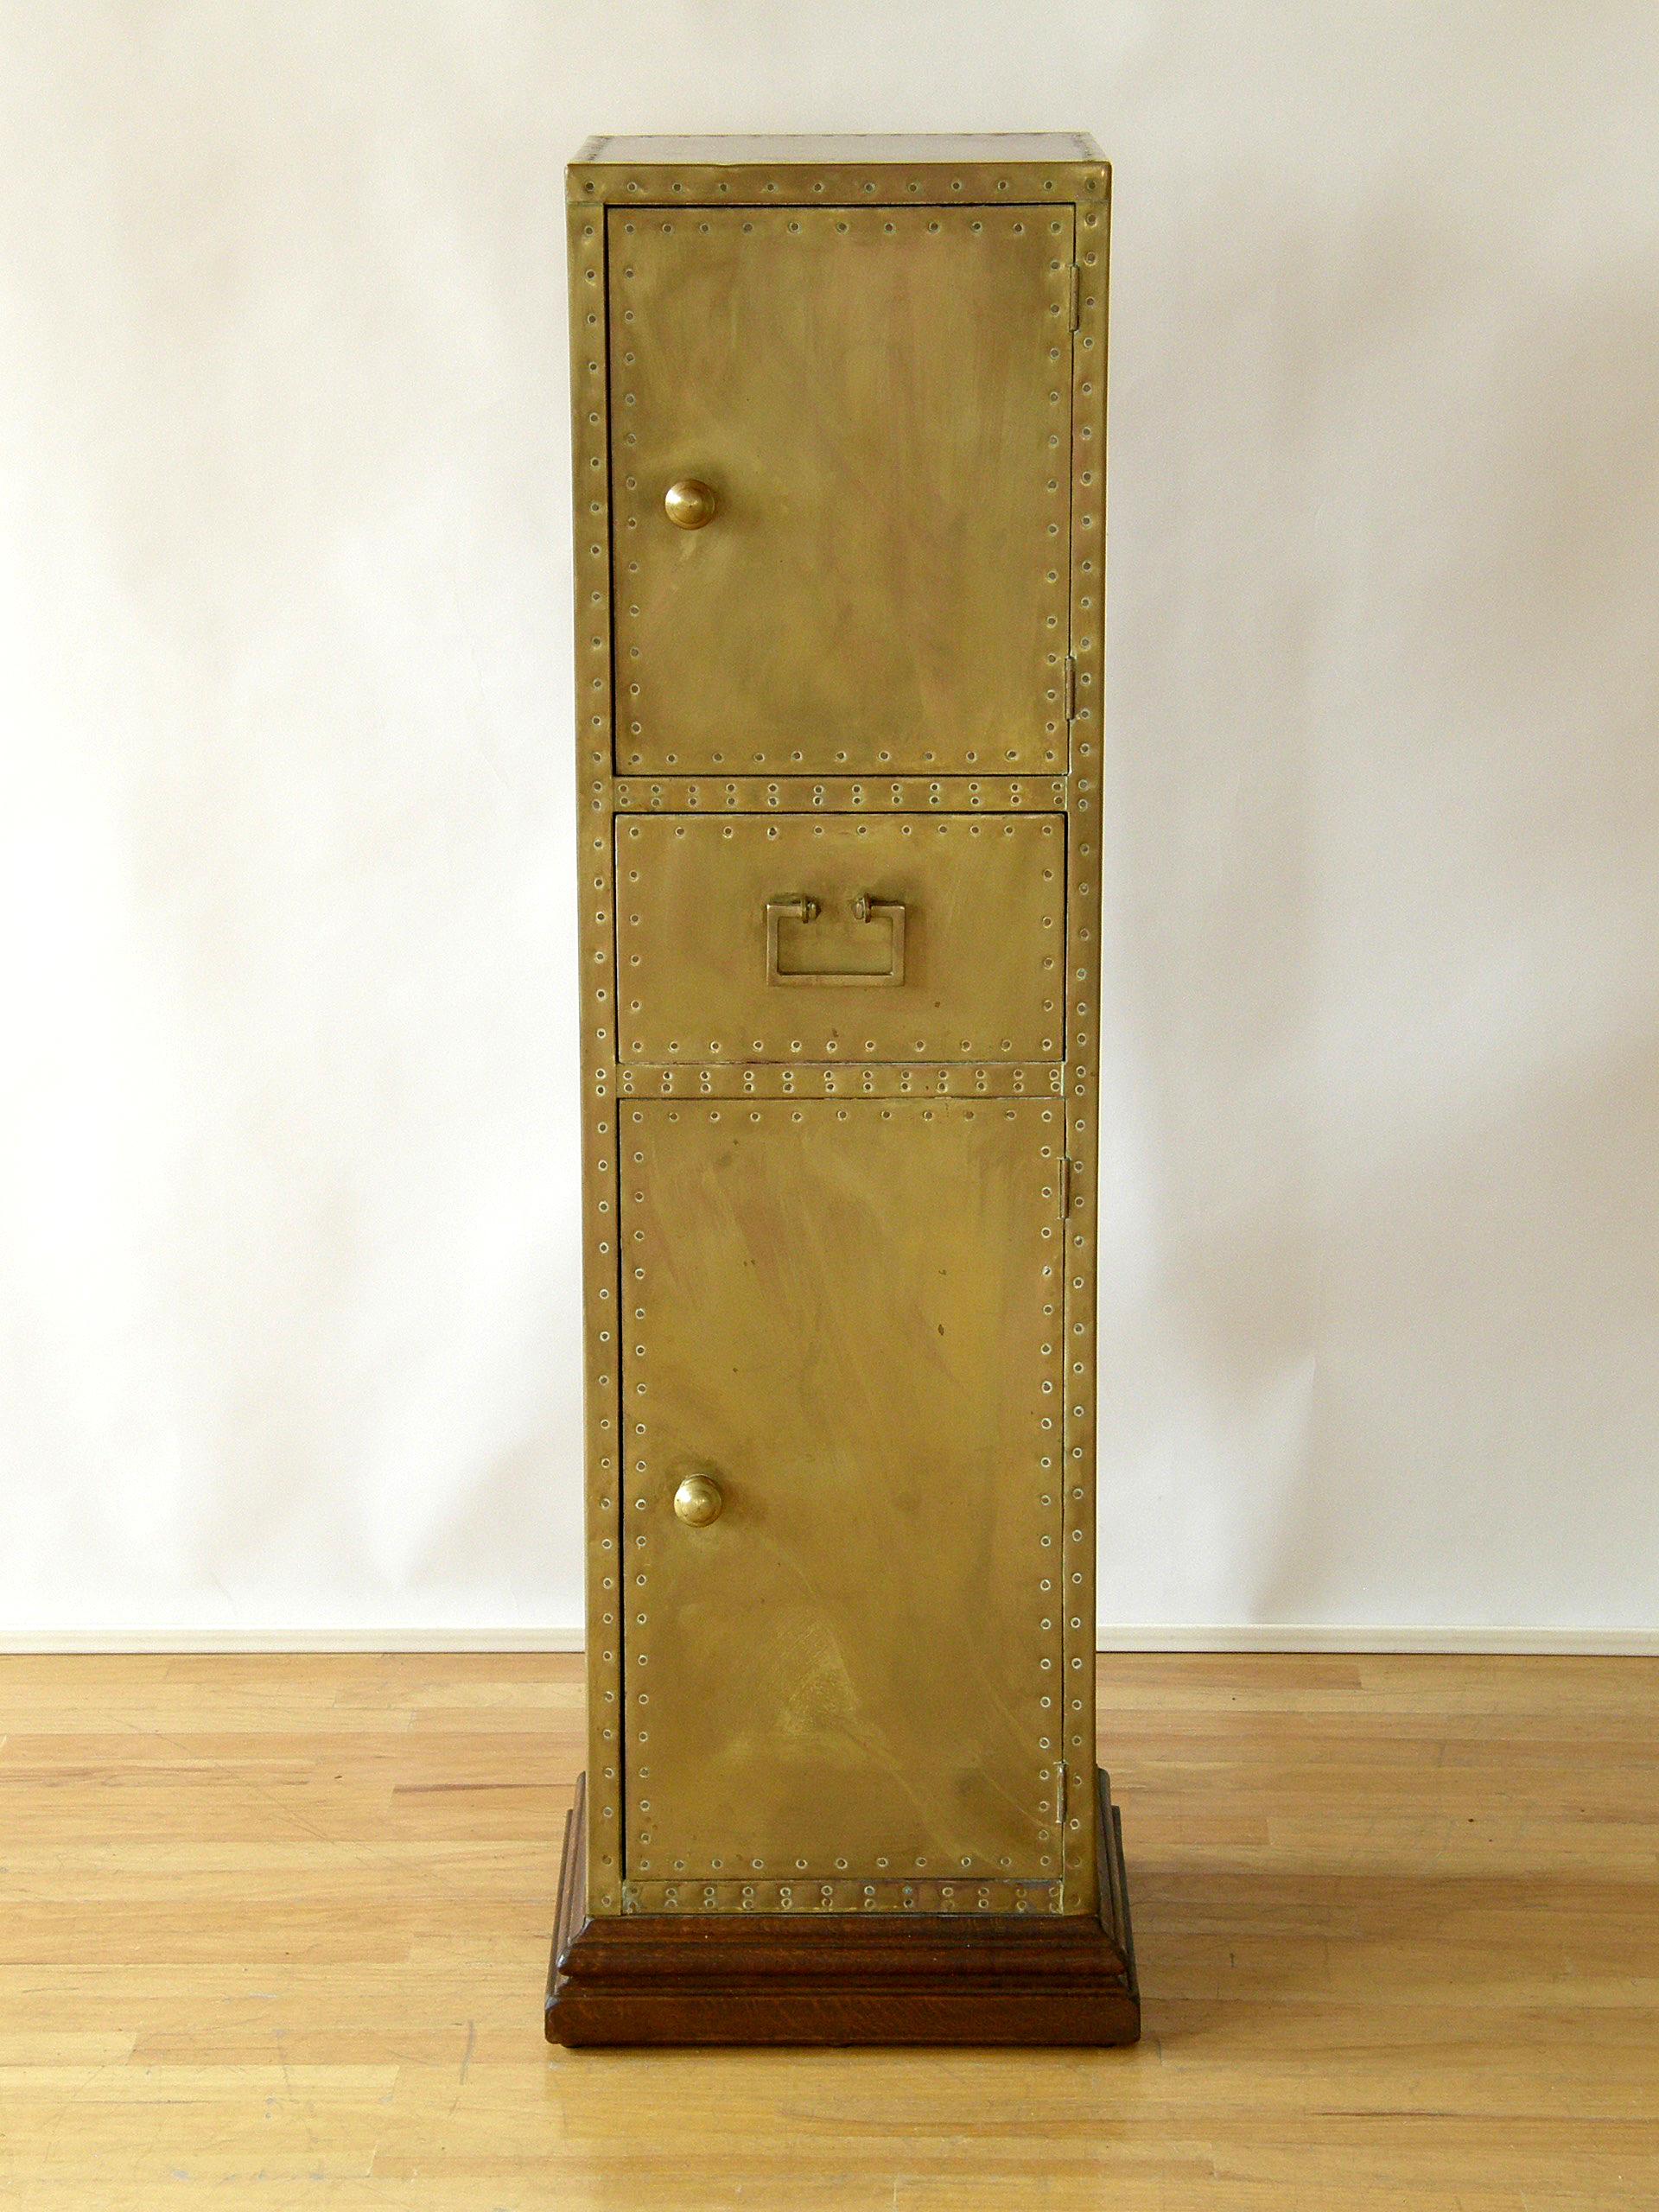 This tall, slender, brass-clad cabinet by Sarreid is shaped like a pedestal with storage. The nailheads are both functional and decorative as they create linear patterns that highlight the form. There is a smaller door on top and a larger door on